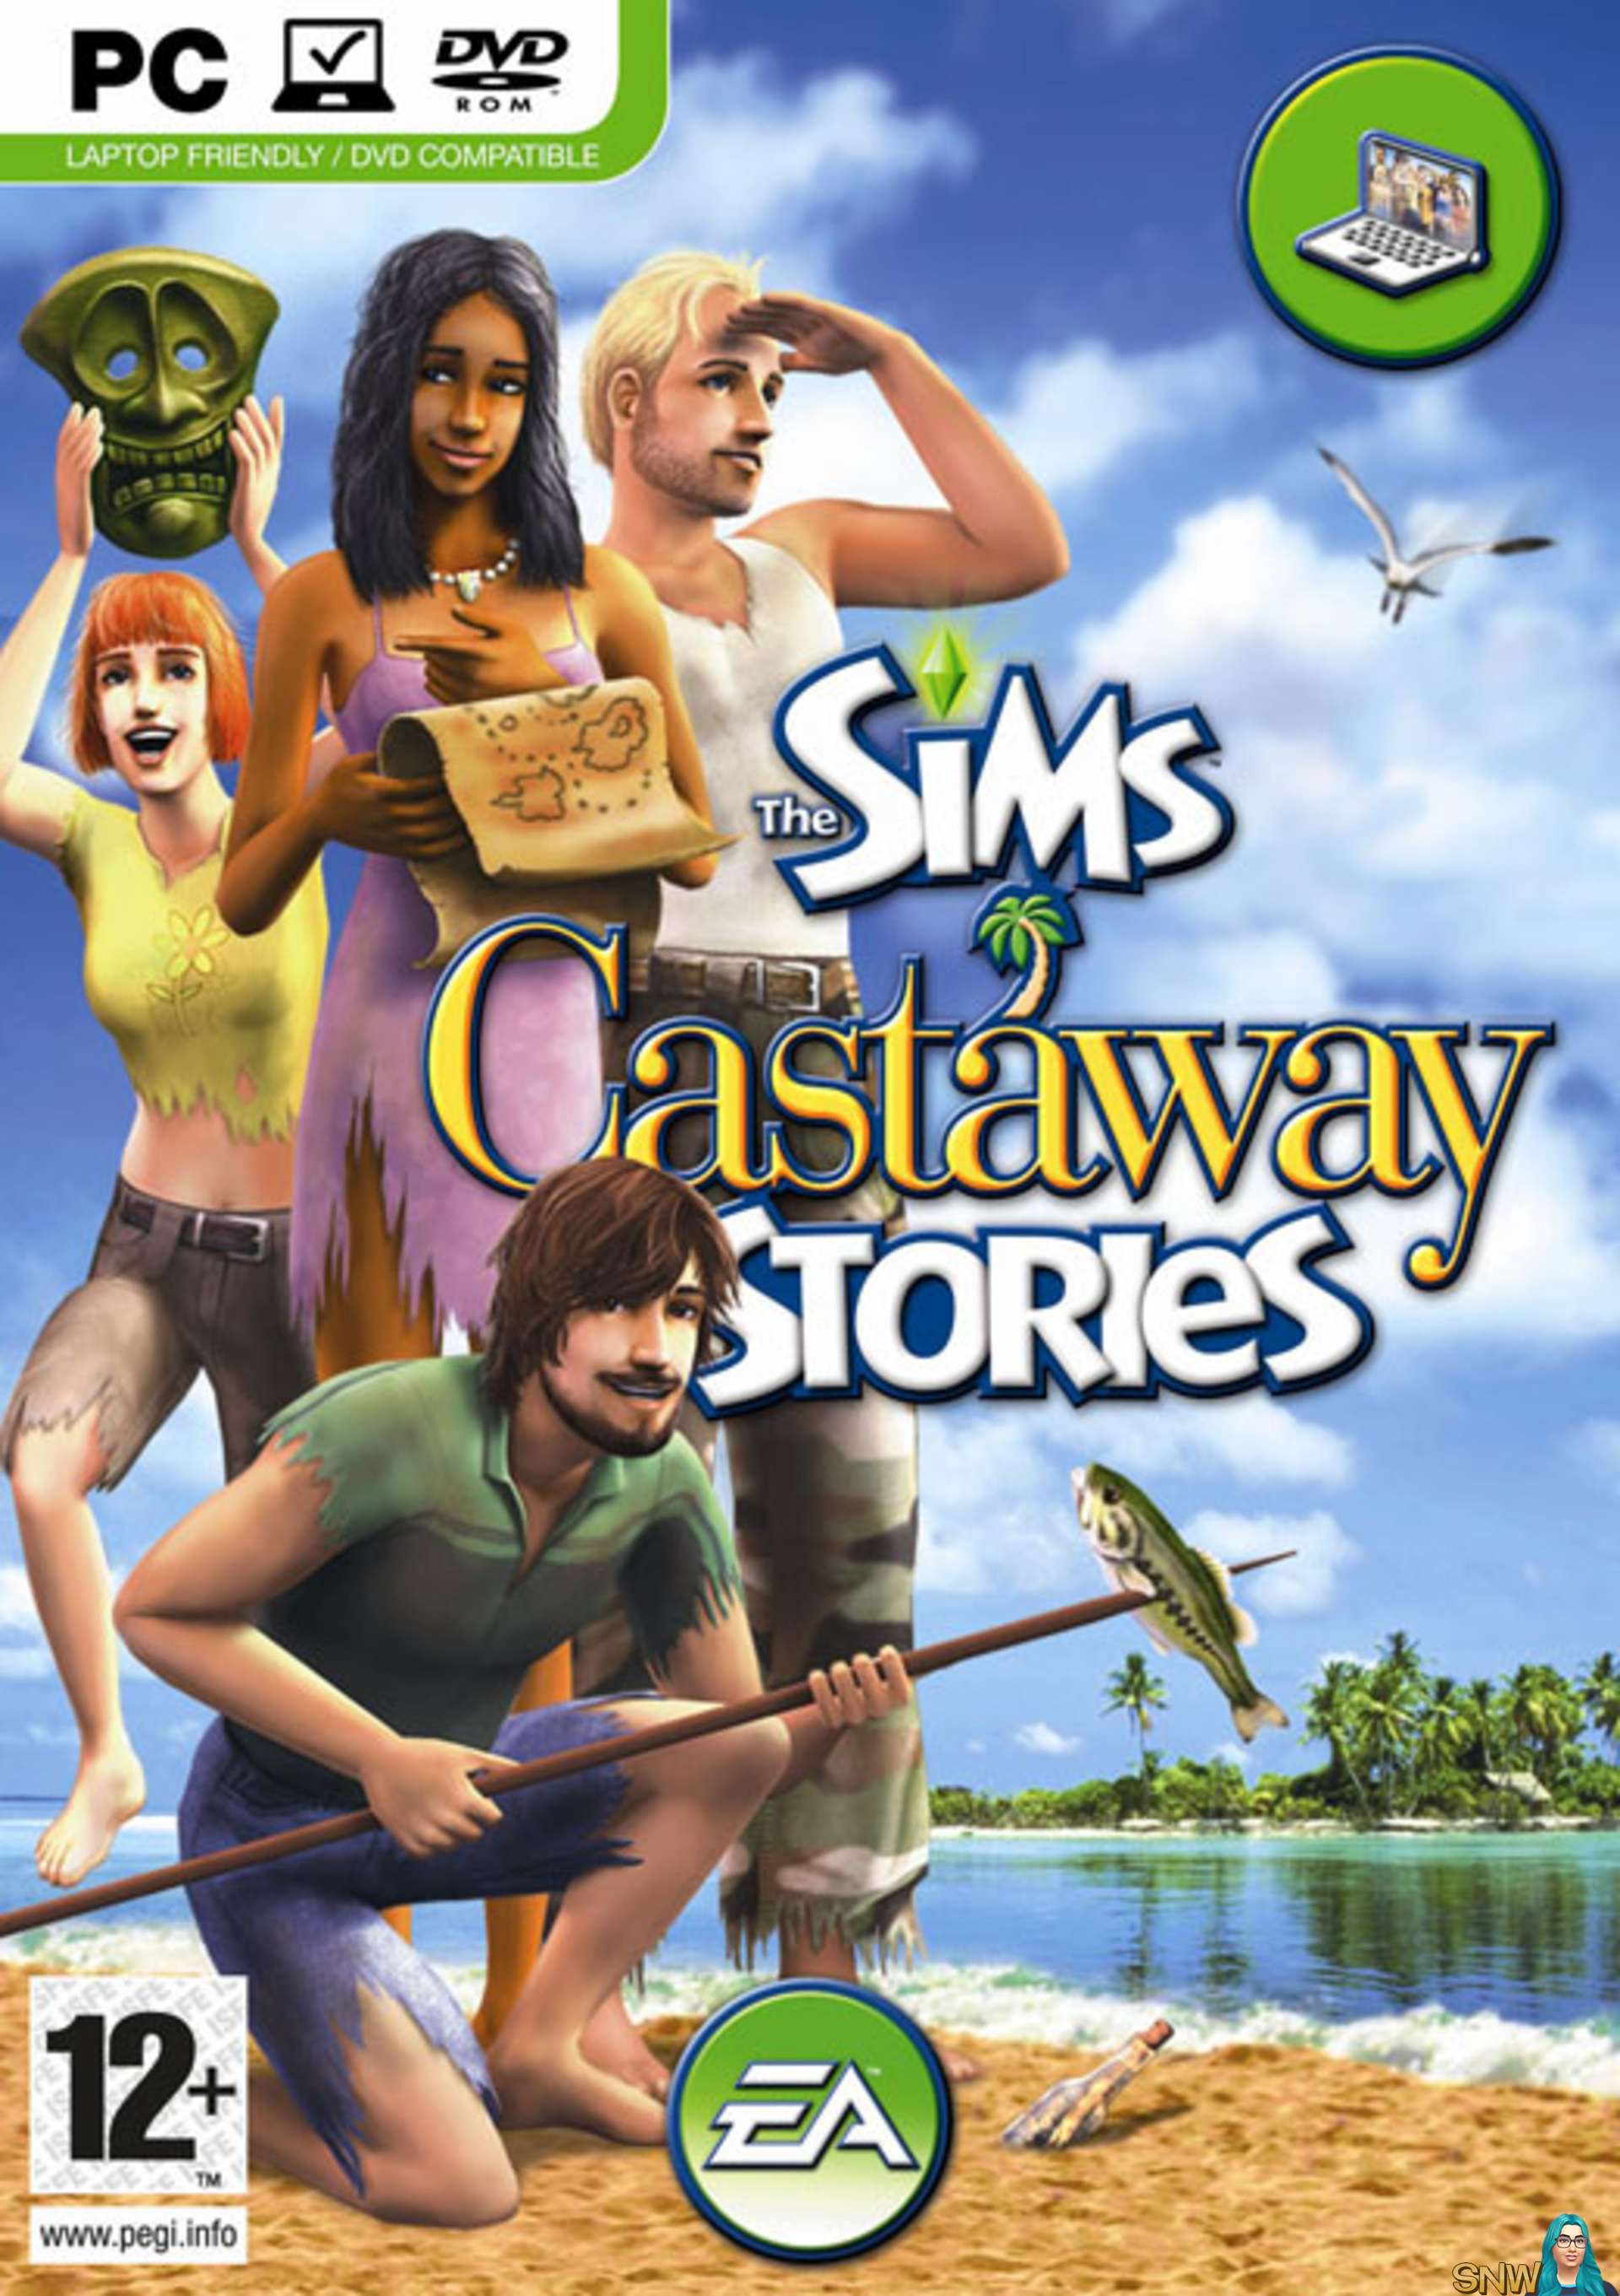 Download Game The Sims Castaway